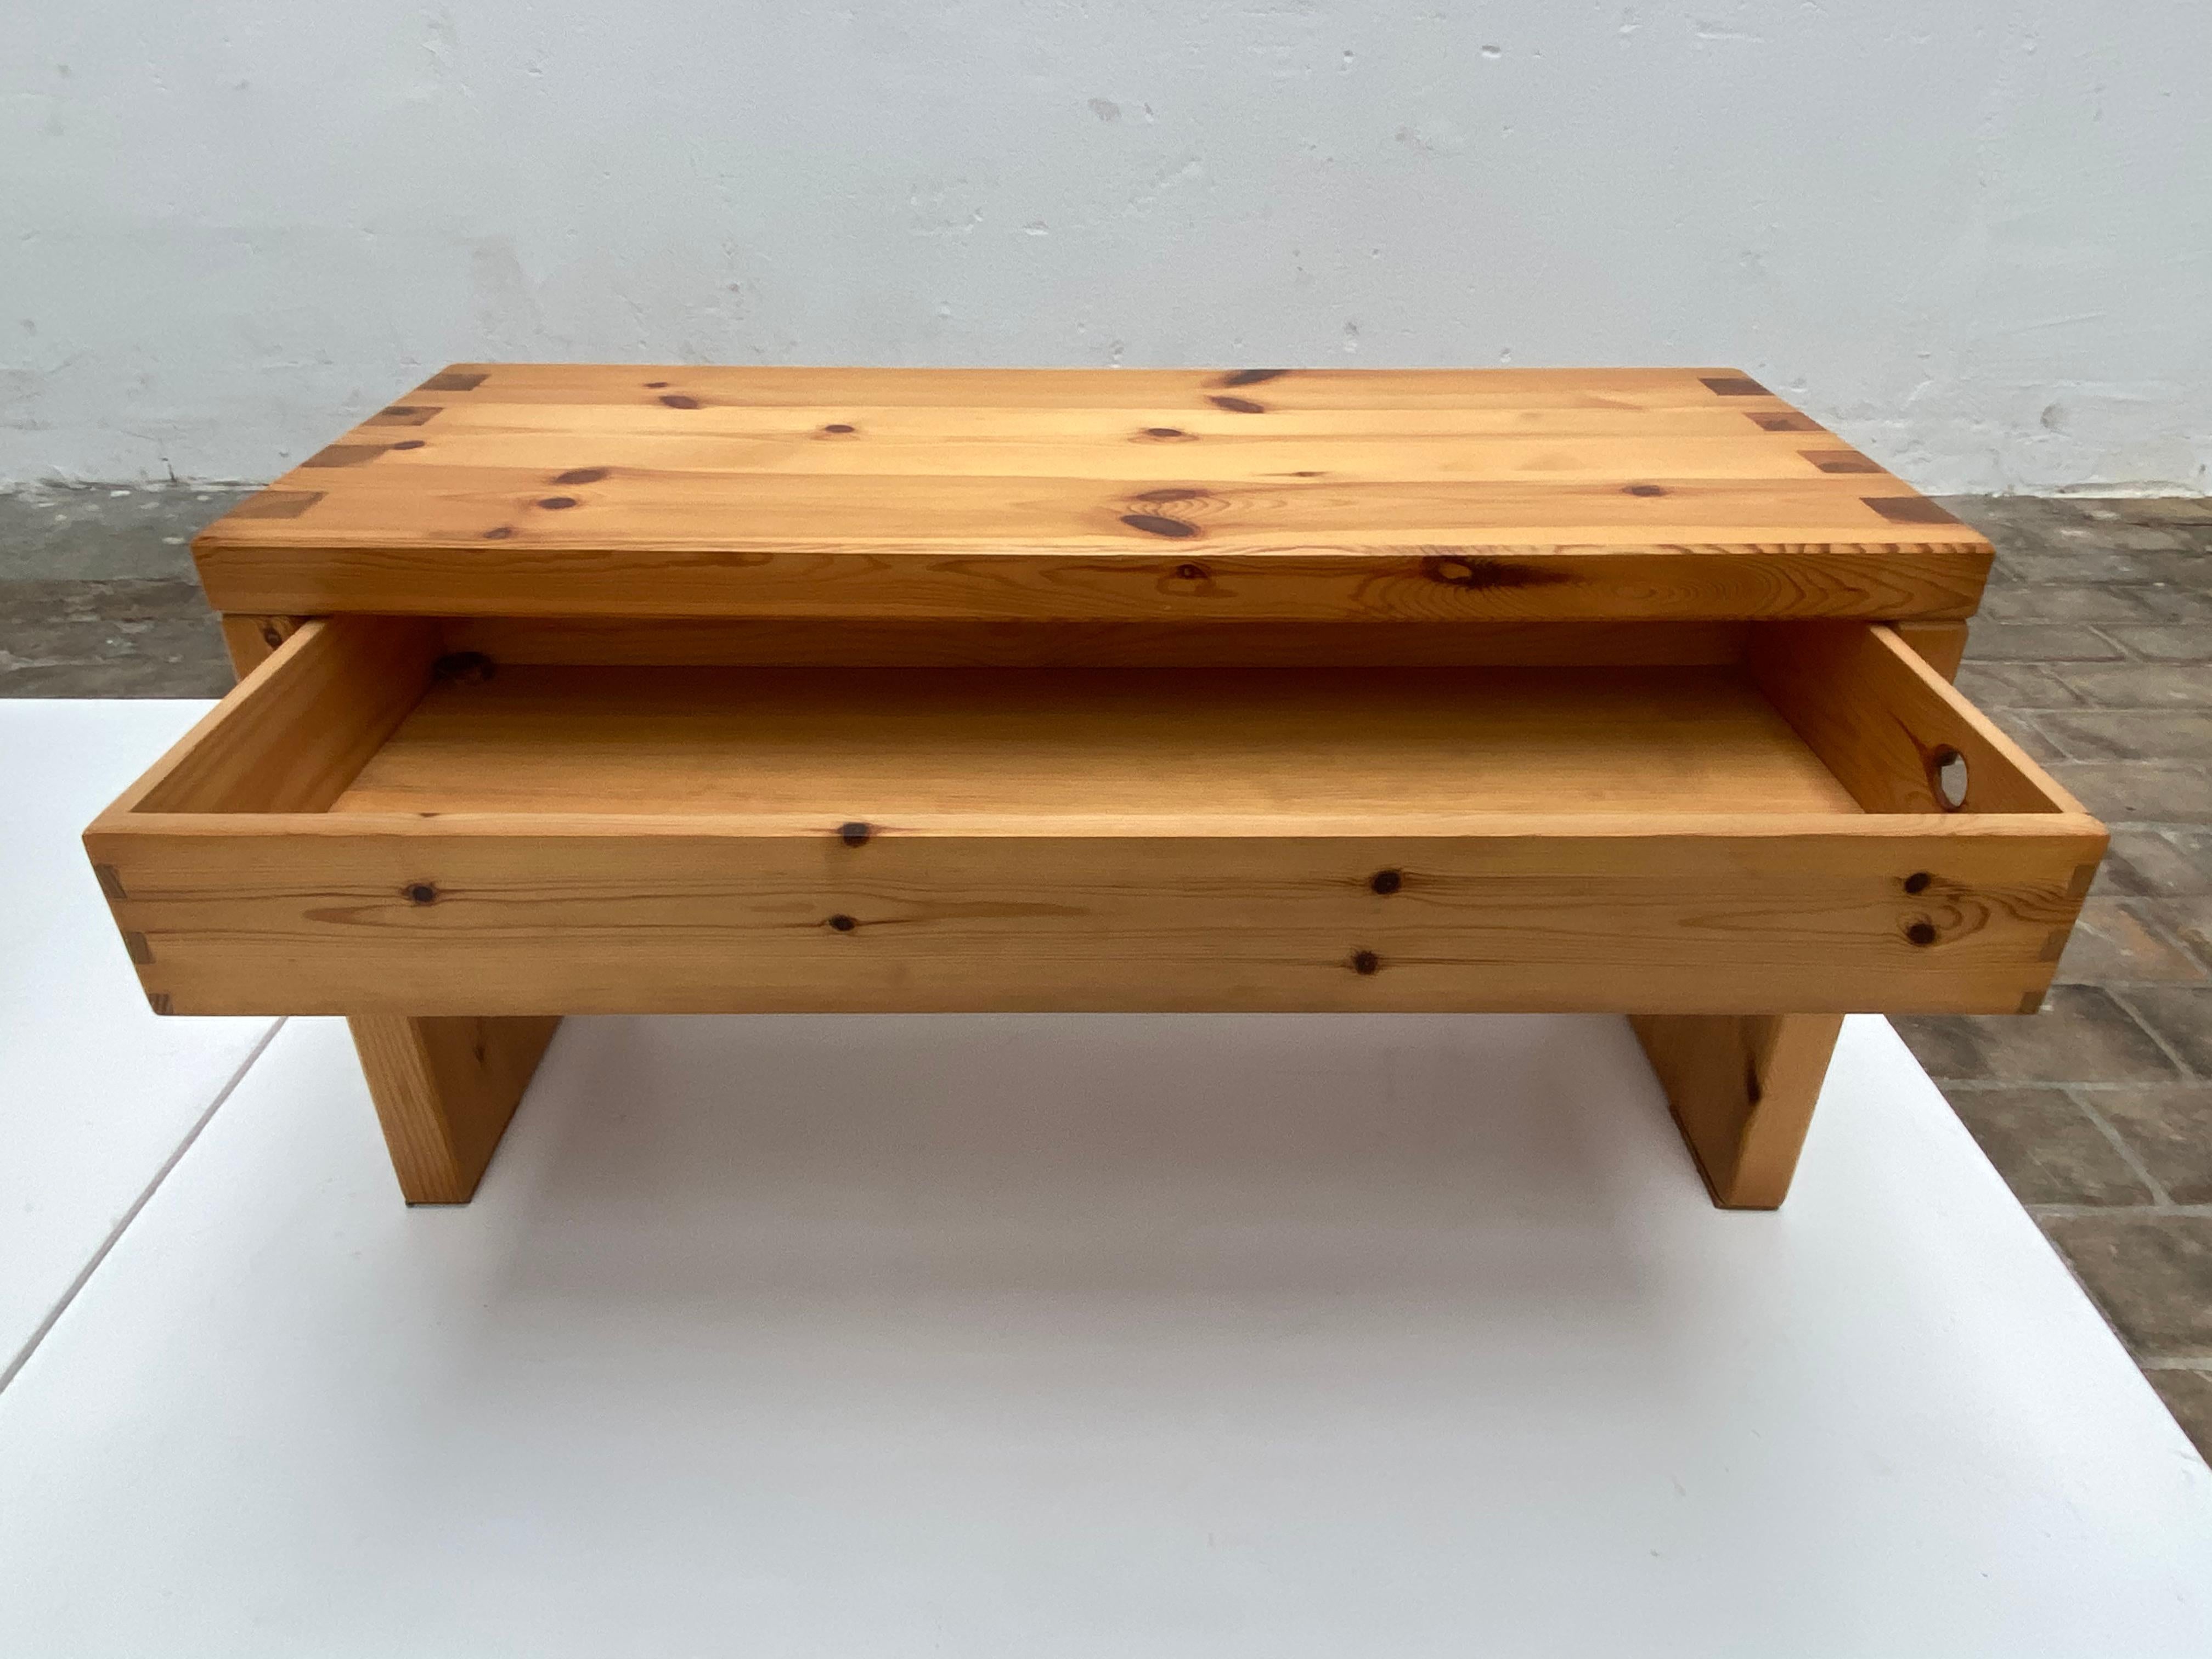 Beautiful minimal solid pine wood made 1970s side table with a single large drawer

Marked Aksel Kjersgaard 

This Danish designer is a master in showing off the refined Scandinavian design by exposing the skilled construction details in the